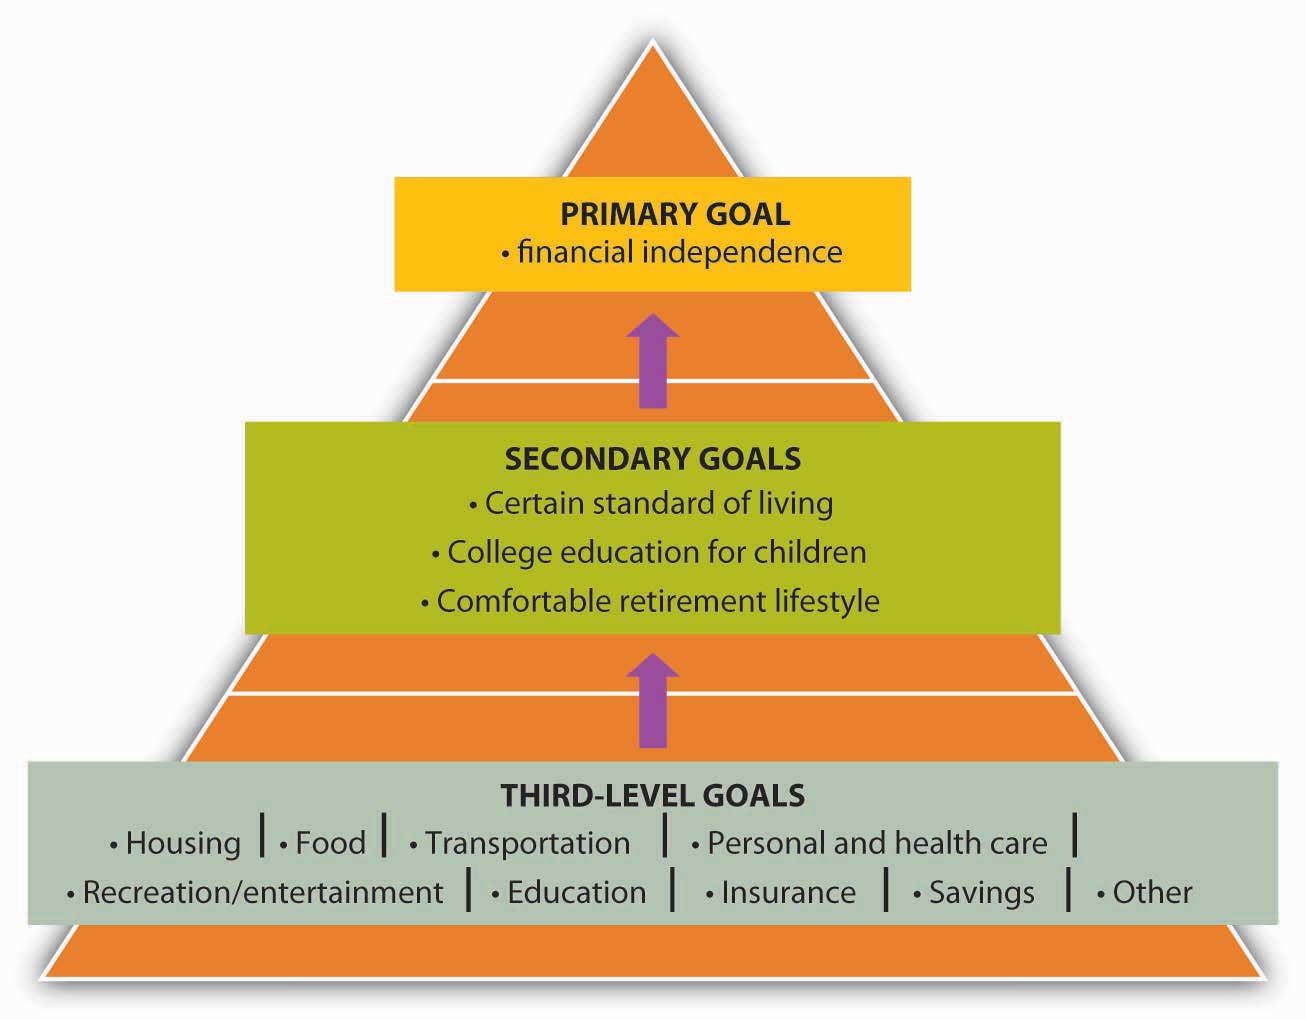 Three-Level Goals/Plans (Primary Goals, Secondary Goals, Third-Level Goals). Primary: financial independence. Secondary: certain standard of living, college education for children, comfortable retirement lifestyle. Third-level: housing, food, transportation, personal and healthcare, recreation/entertainment, education, insurance, savings, other.